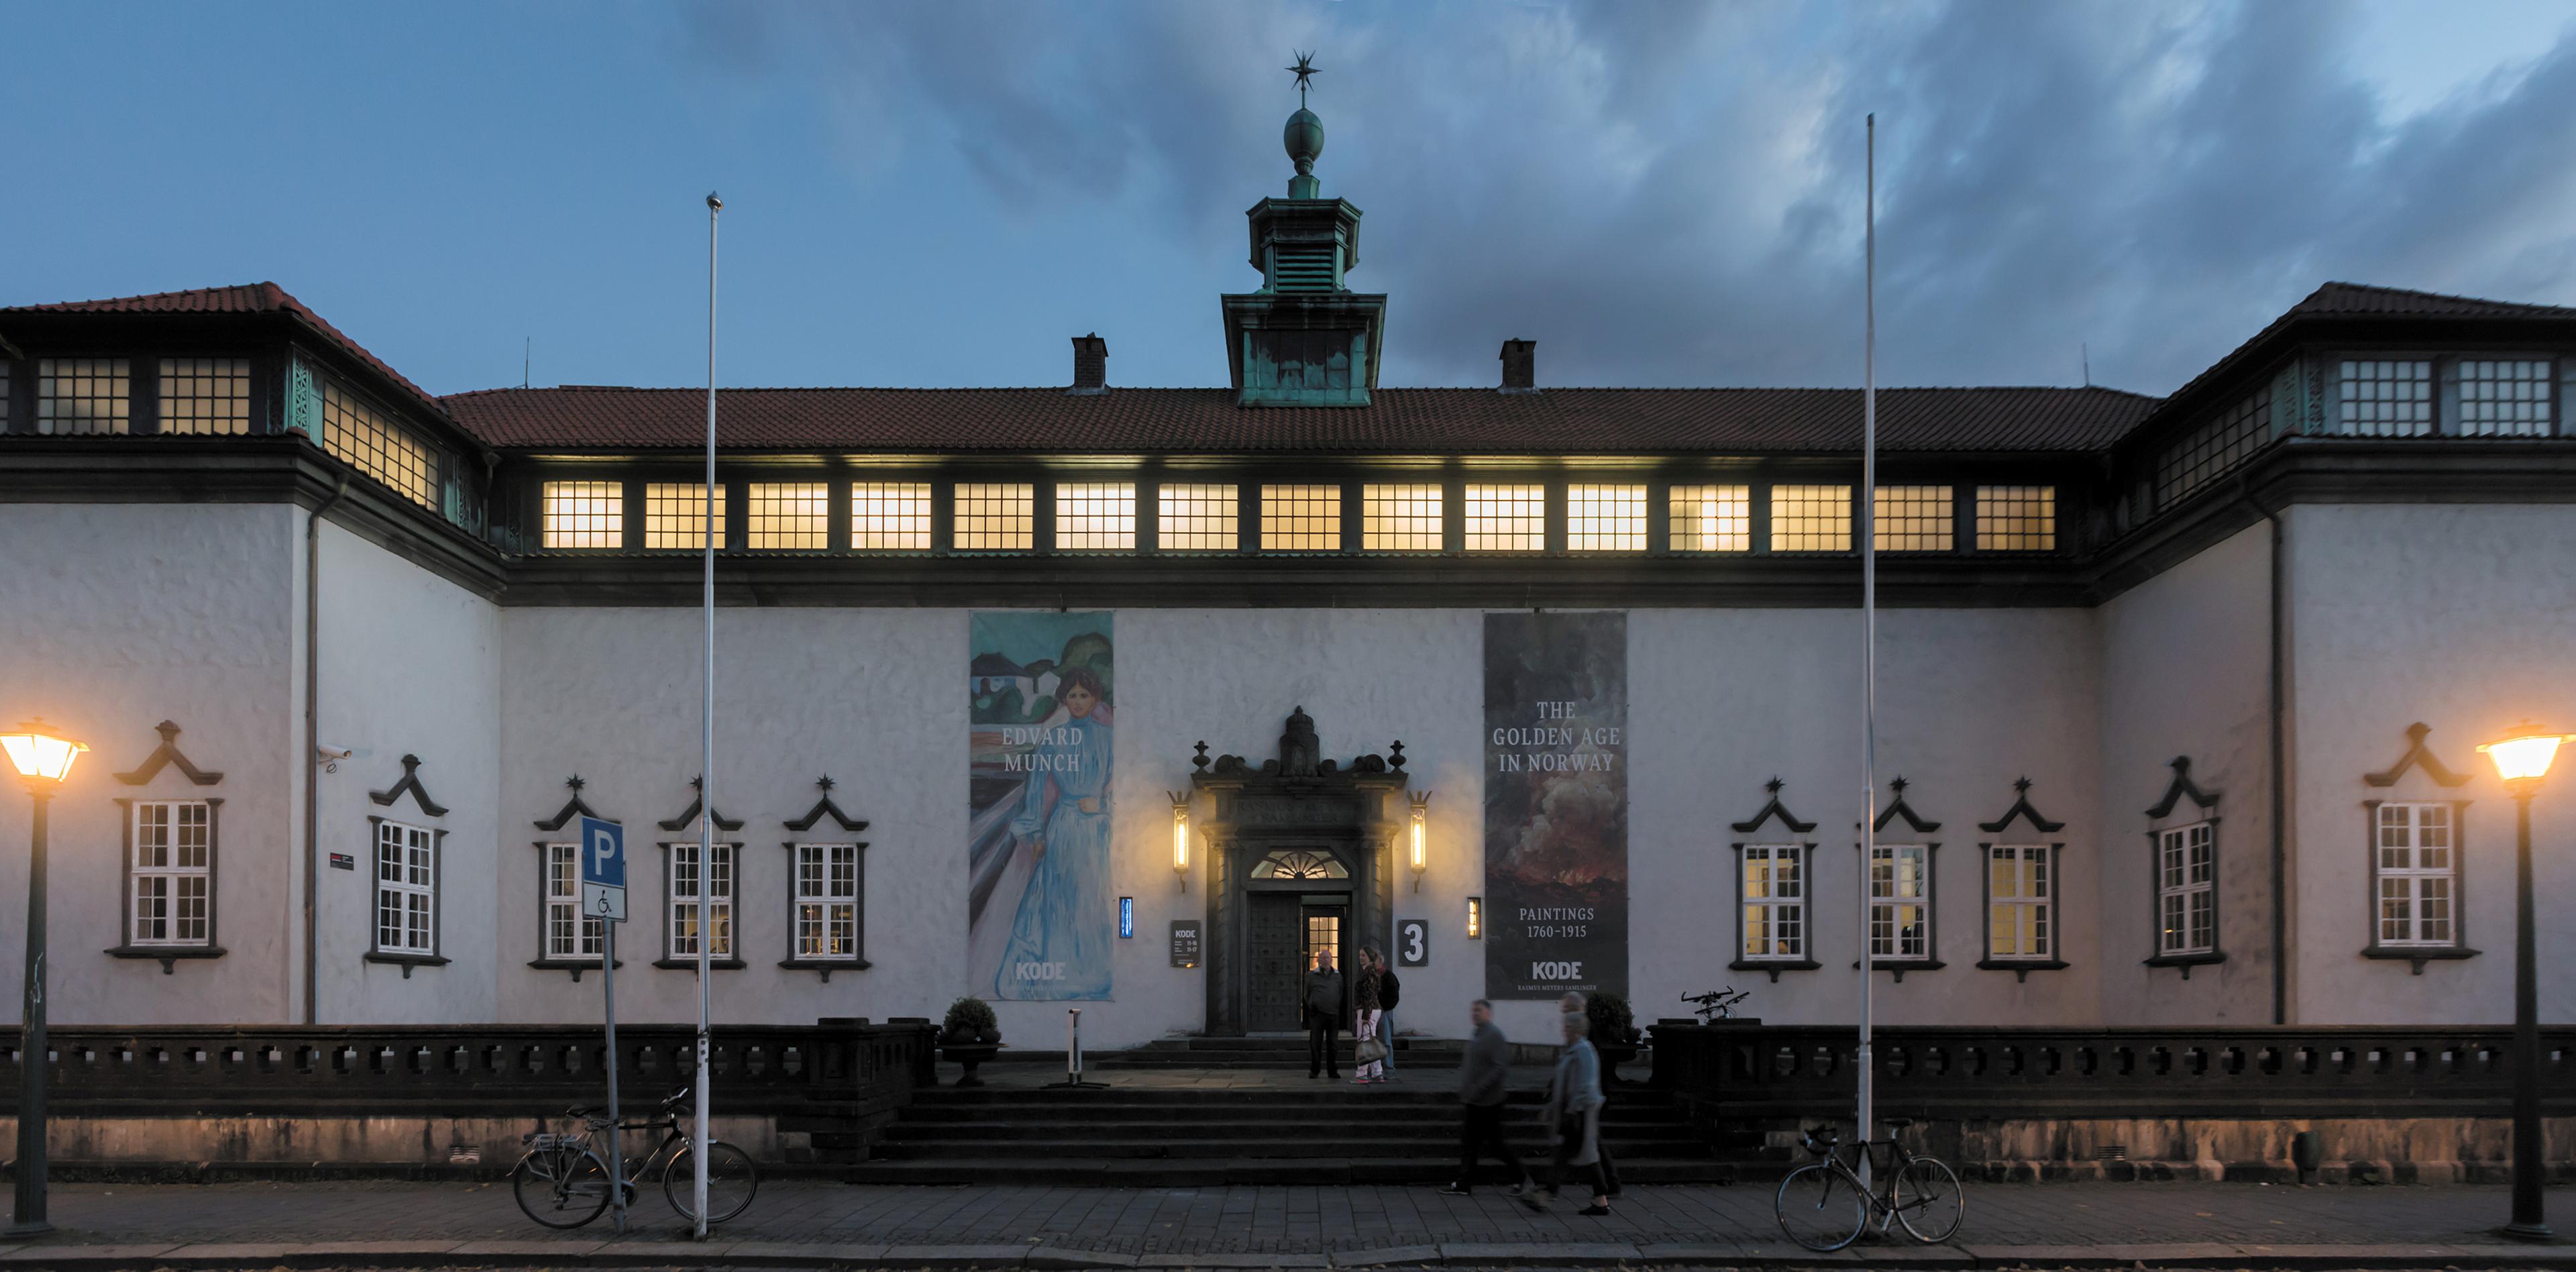 The facade of the museum Rasmus Meyer. It is dusk. 